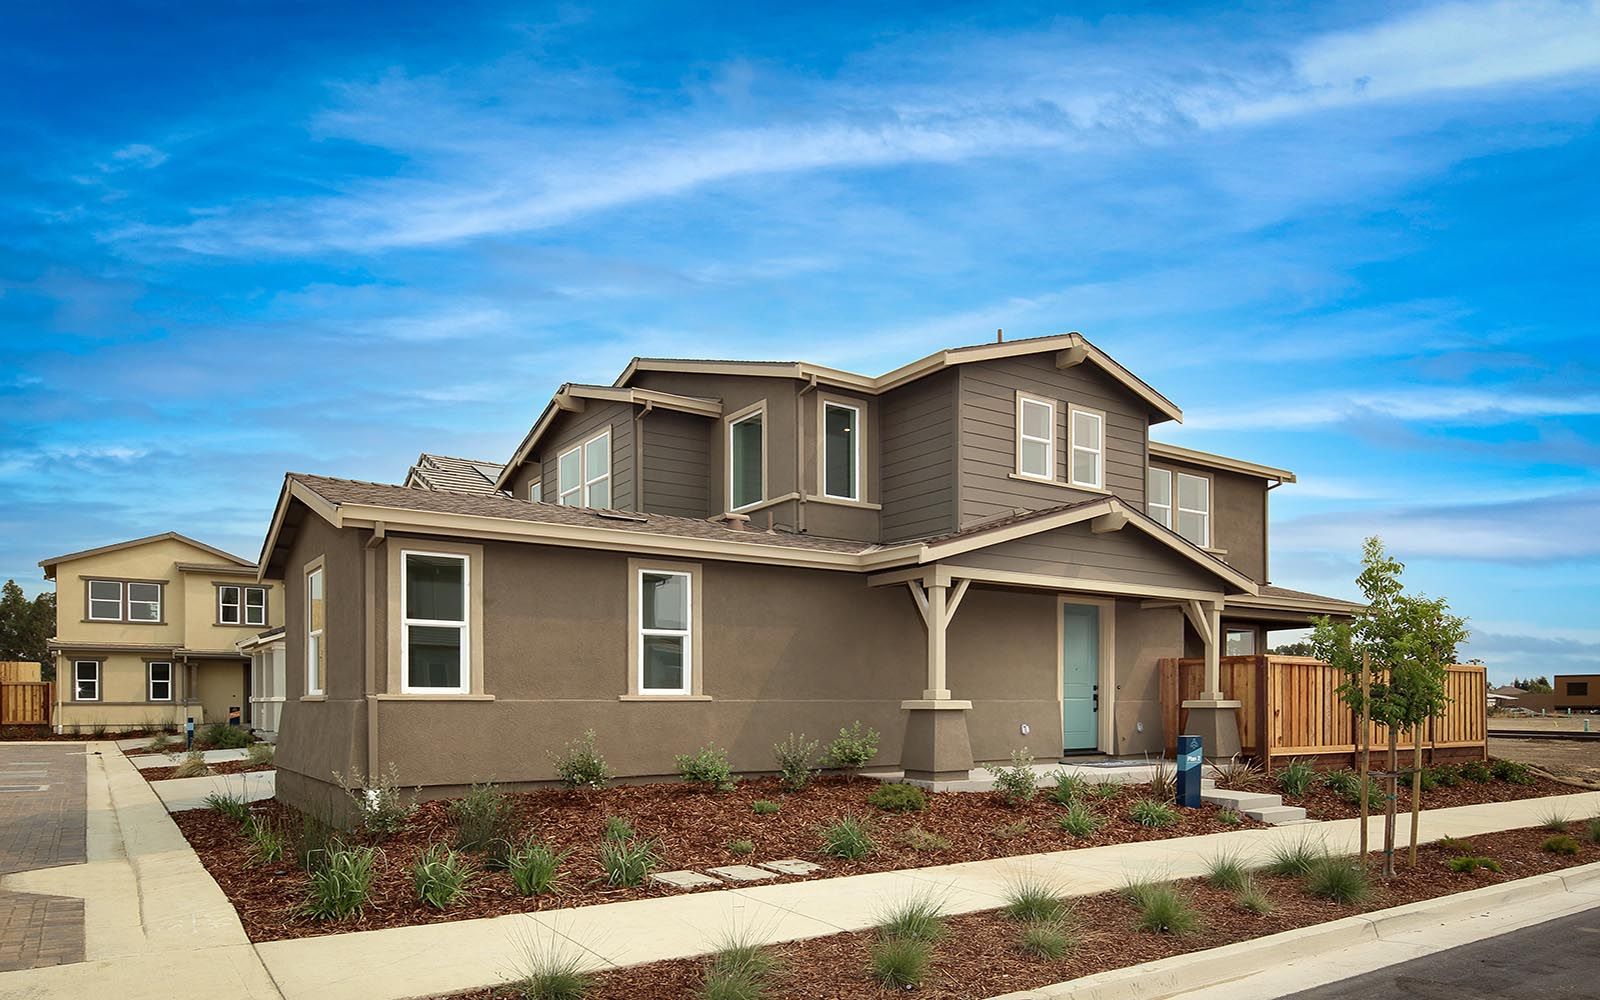 Residence 2 Model at Chandler in Brentwood:Chandler will be a place that’s moment sparking, smile inducing, day making—a fresh opportunity to truly live life to its fullest.